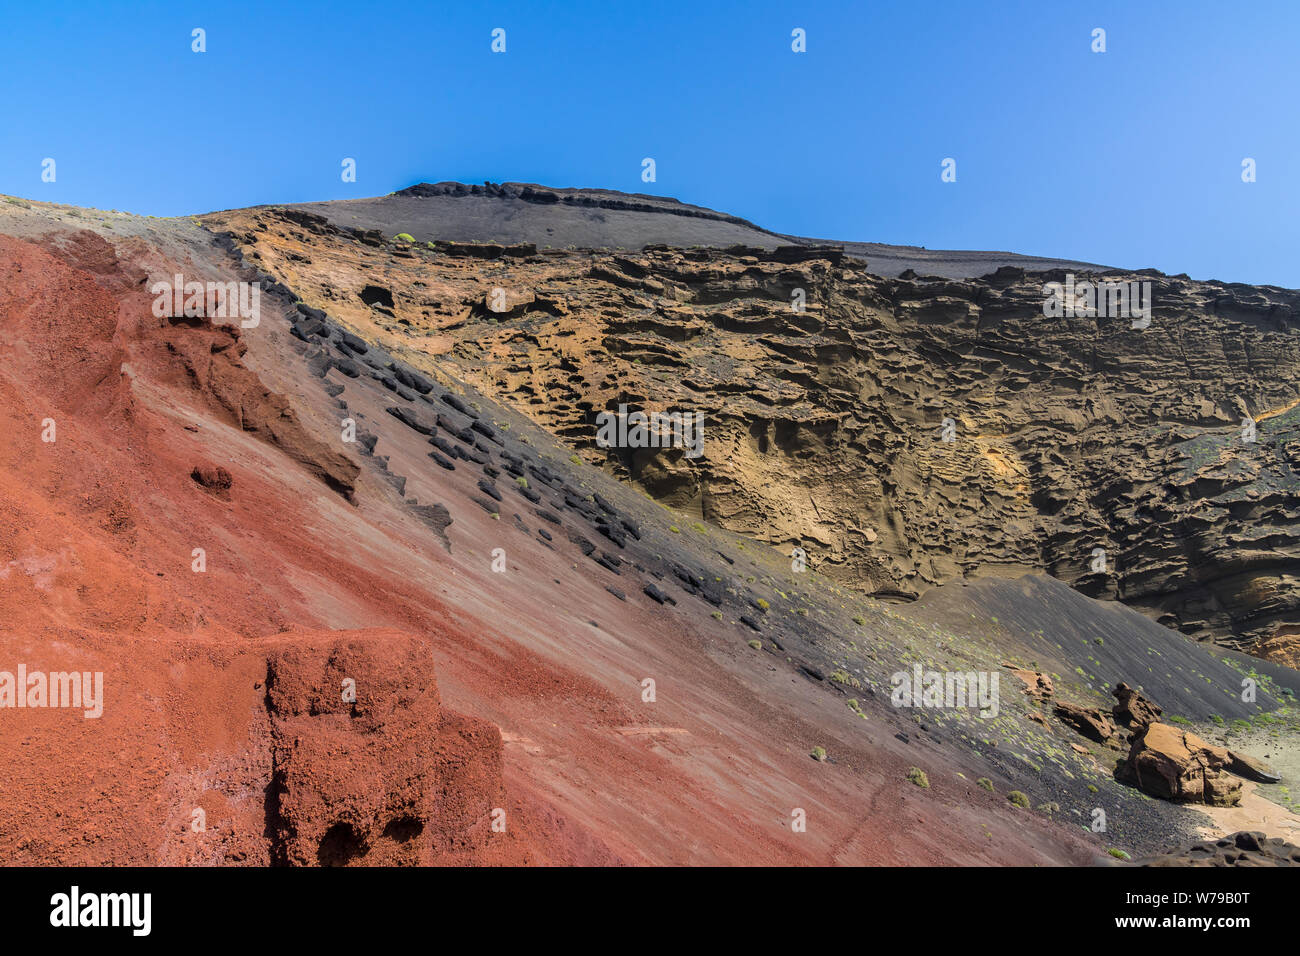 Spain, Lanzarote, Red and black volcanic rock at el golfo bay Stock Photo